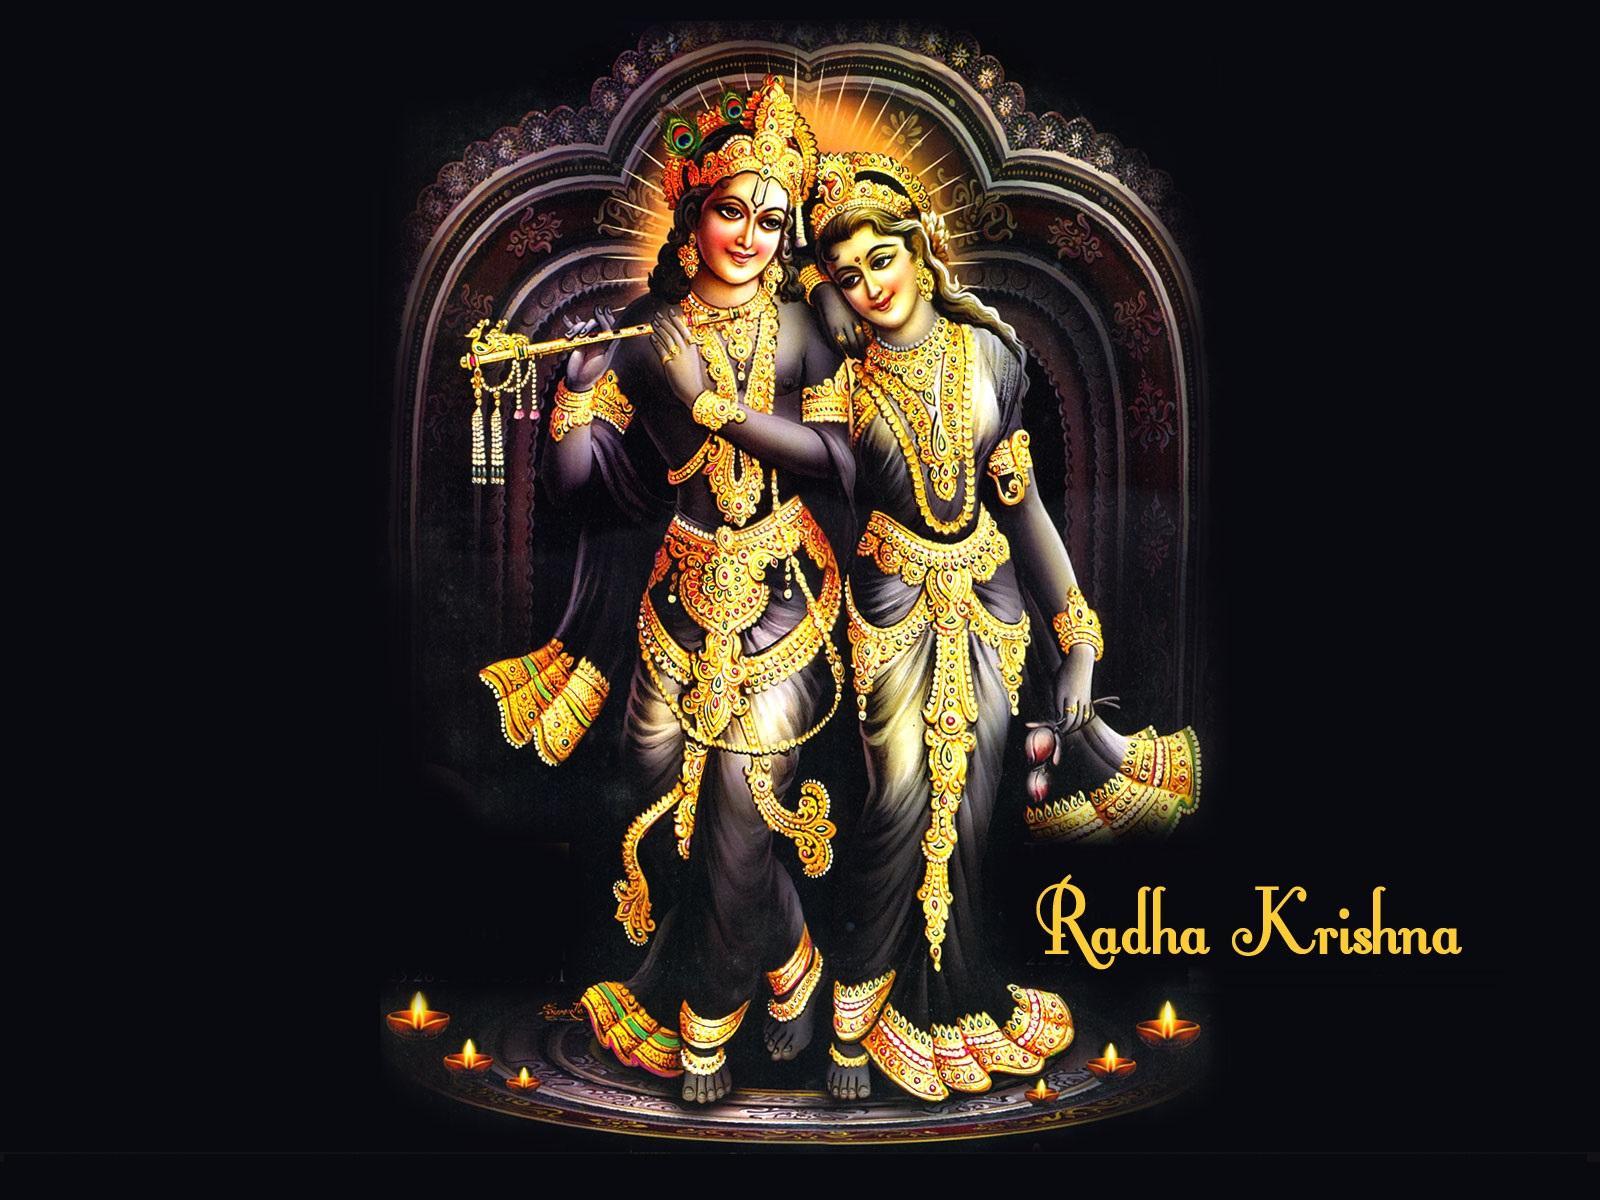 Lord Krishna Live Wallpaper Hd For Android Apk Download